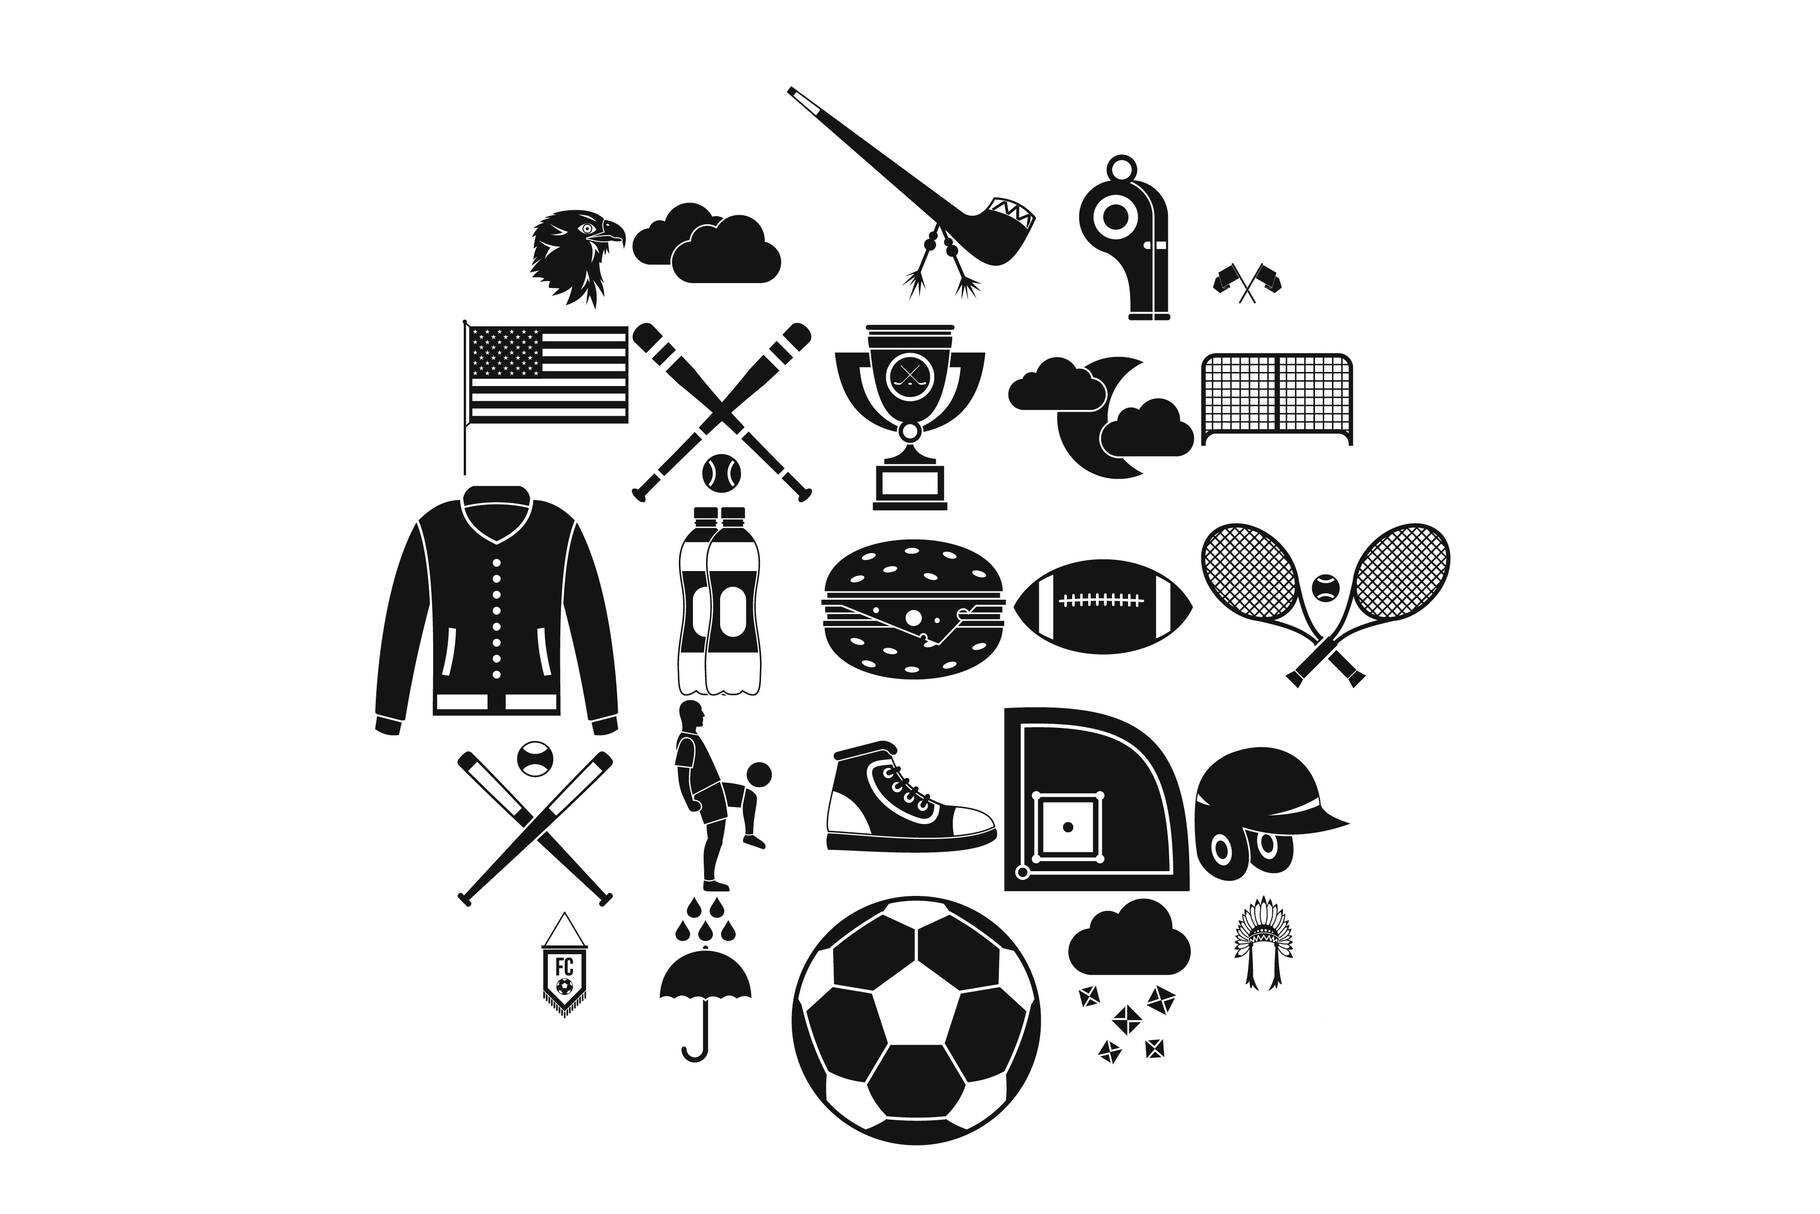 Kinds of sports icons set cover image.